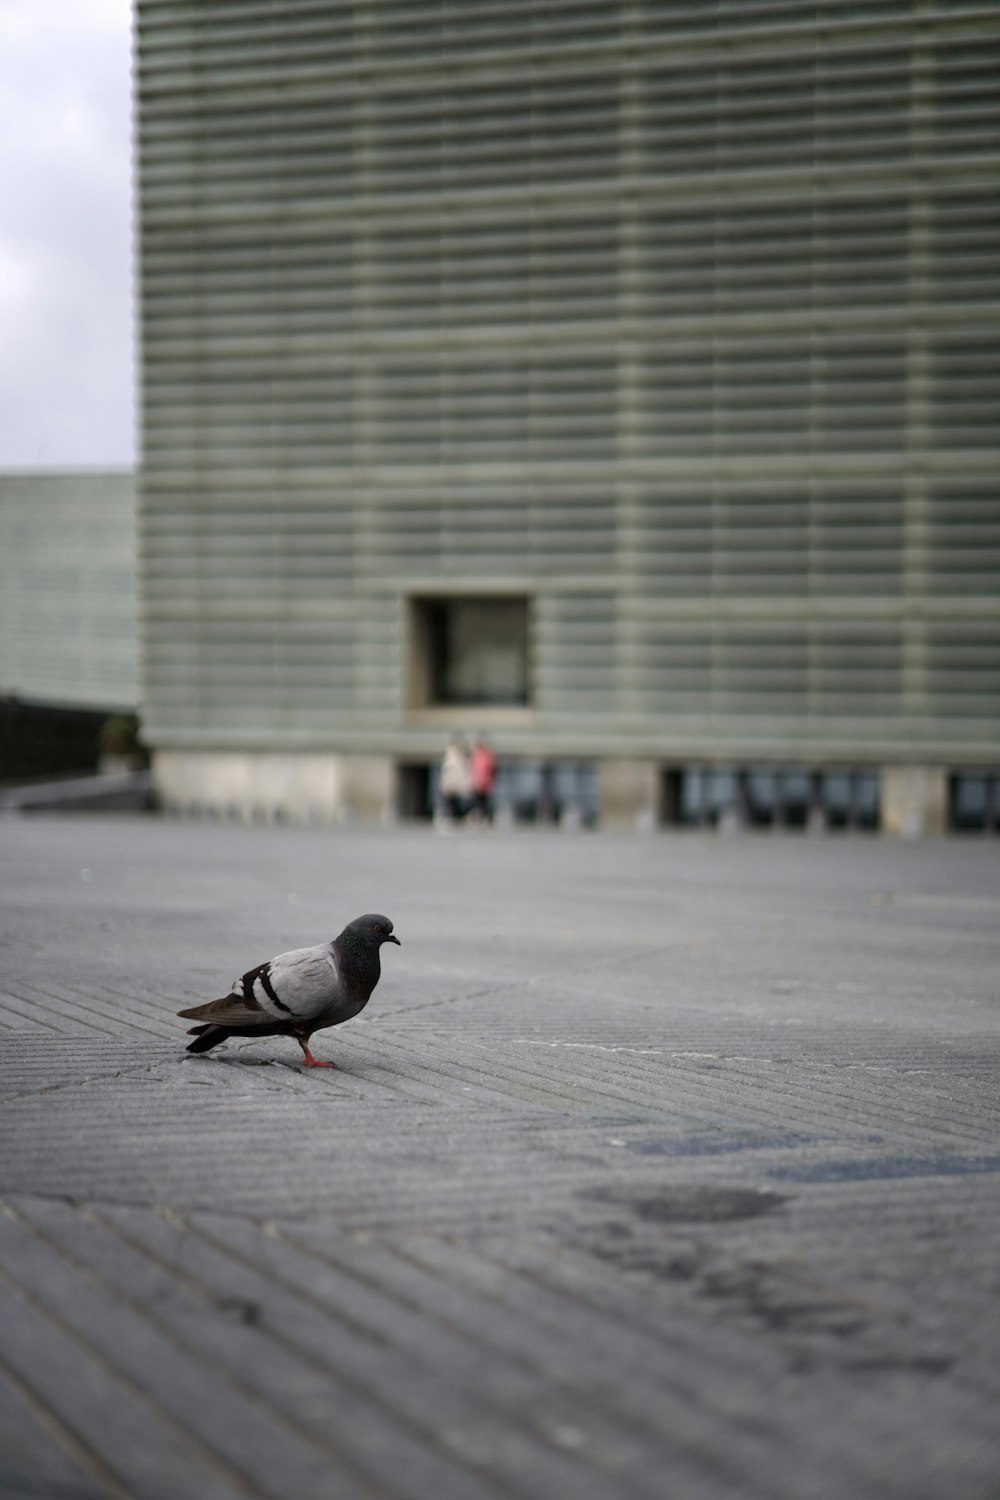 a pigeon is standing on the ground in front of a building